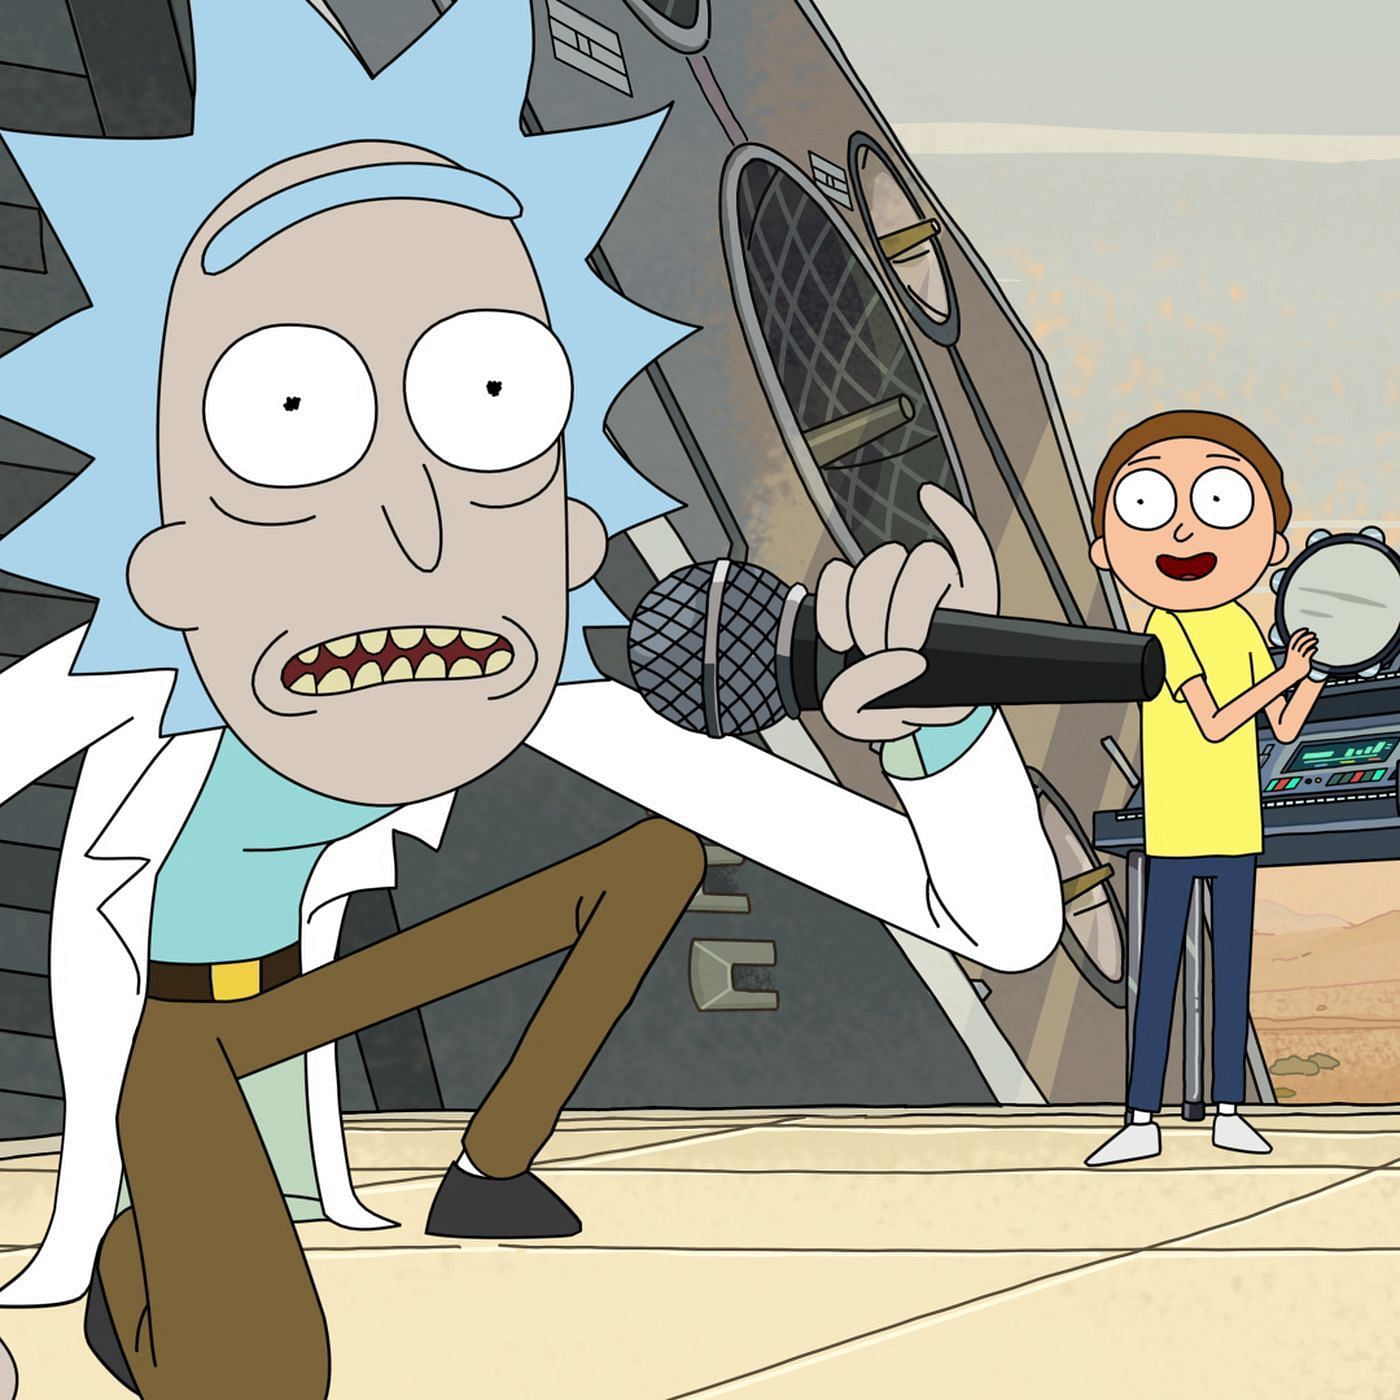 Rick and Morty is a sci-fi animated series for adults (Image via Adult Swim)